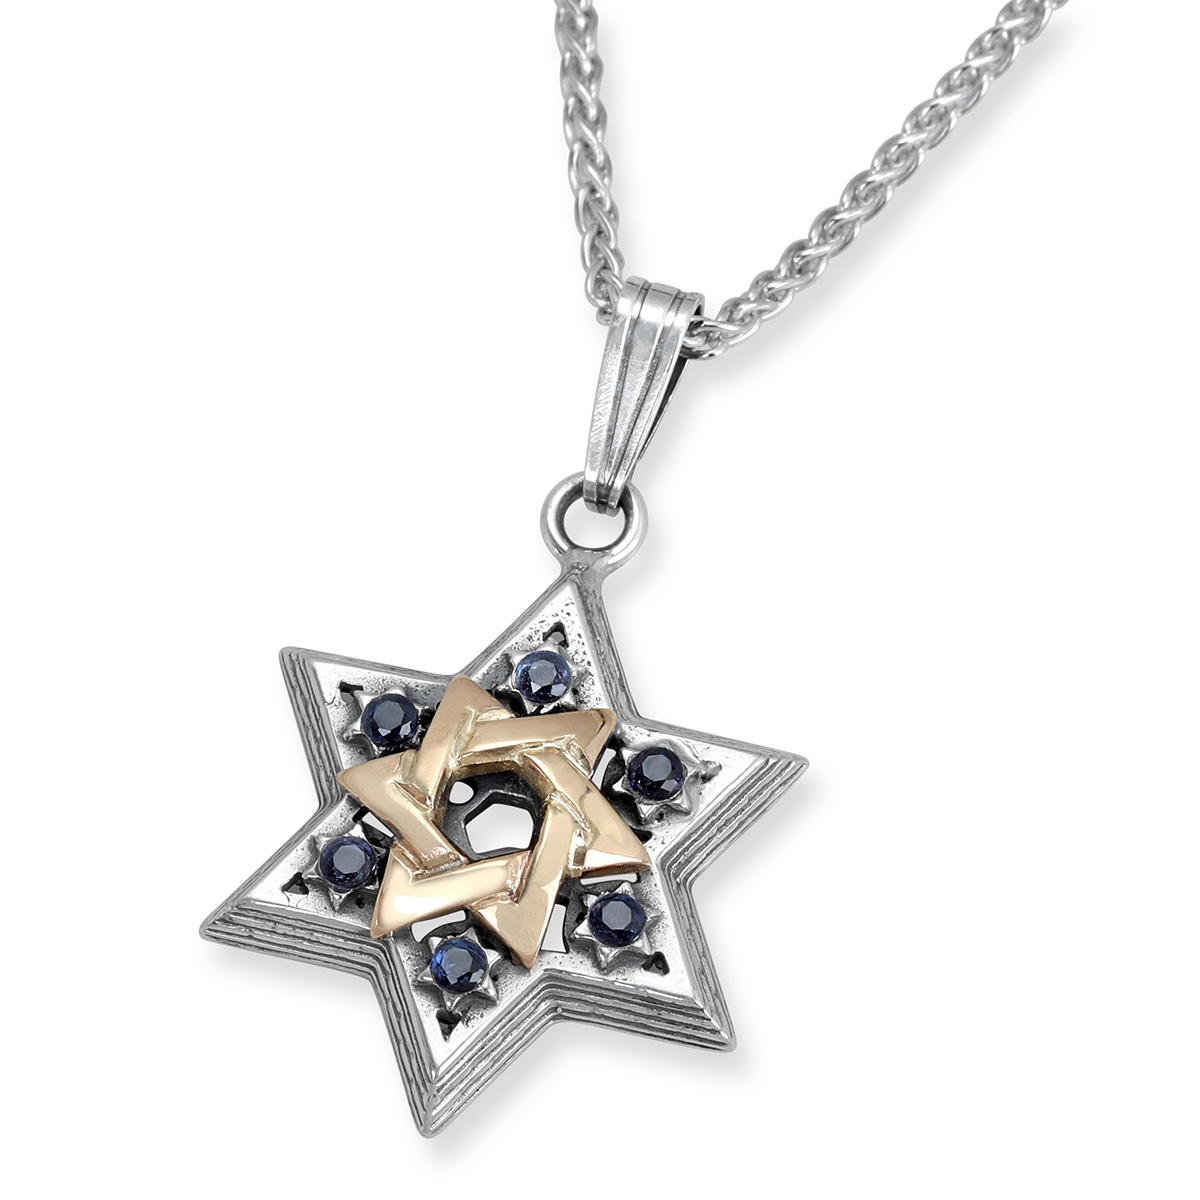 Handcrafted Sterling Silver and 9K Gold Star of David Necklace with Sapphire Stones - 1